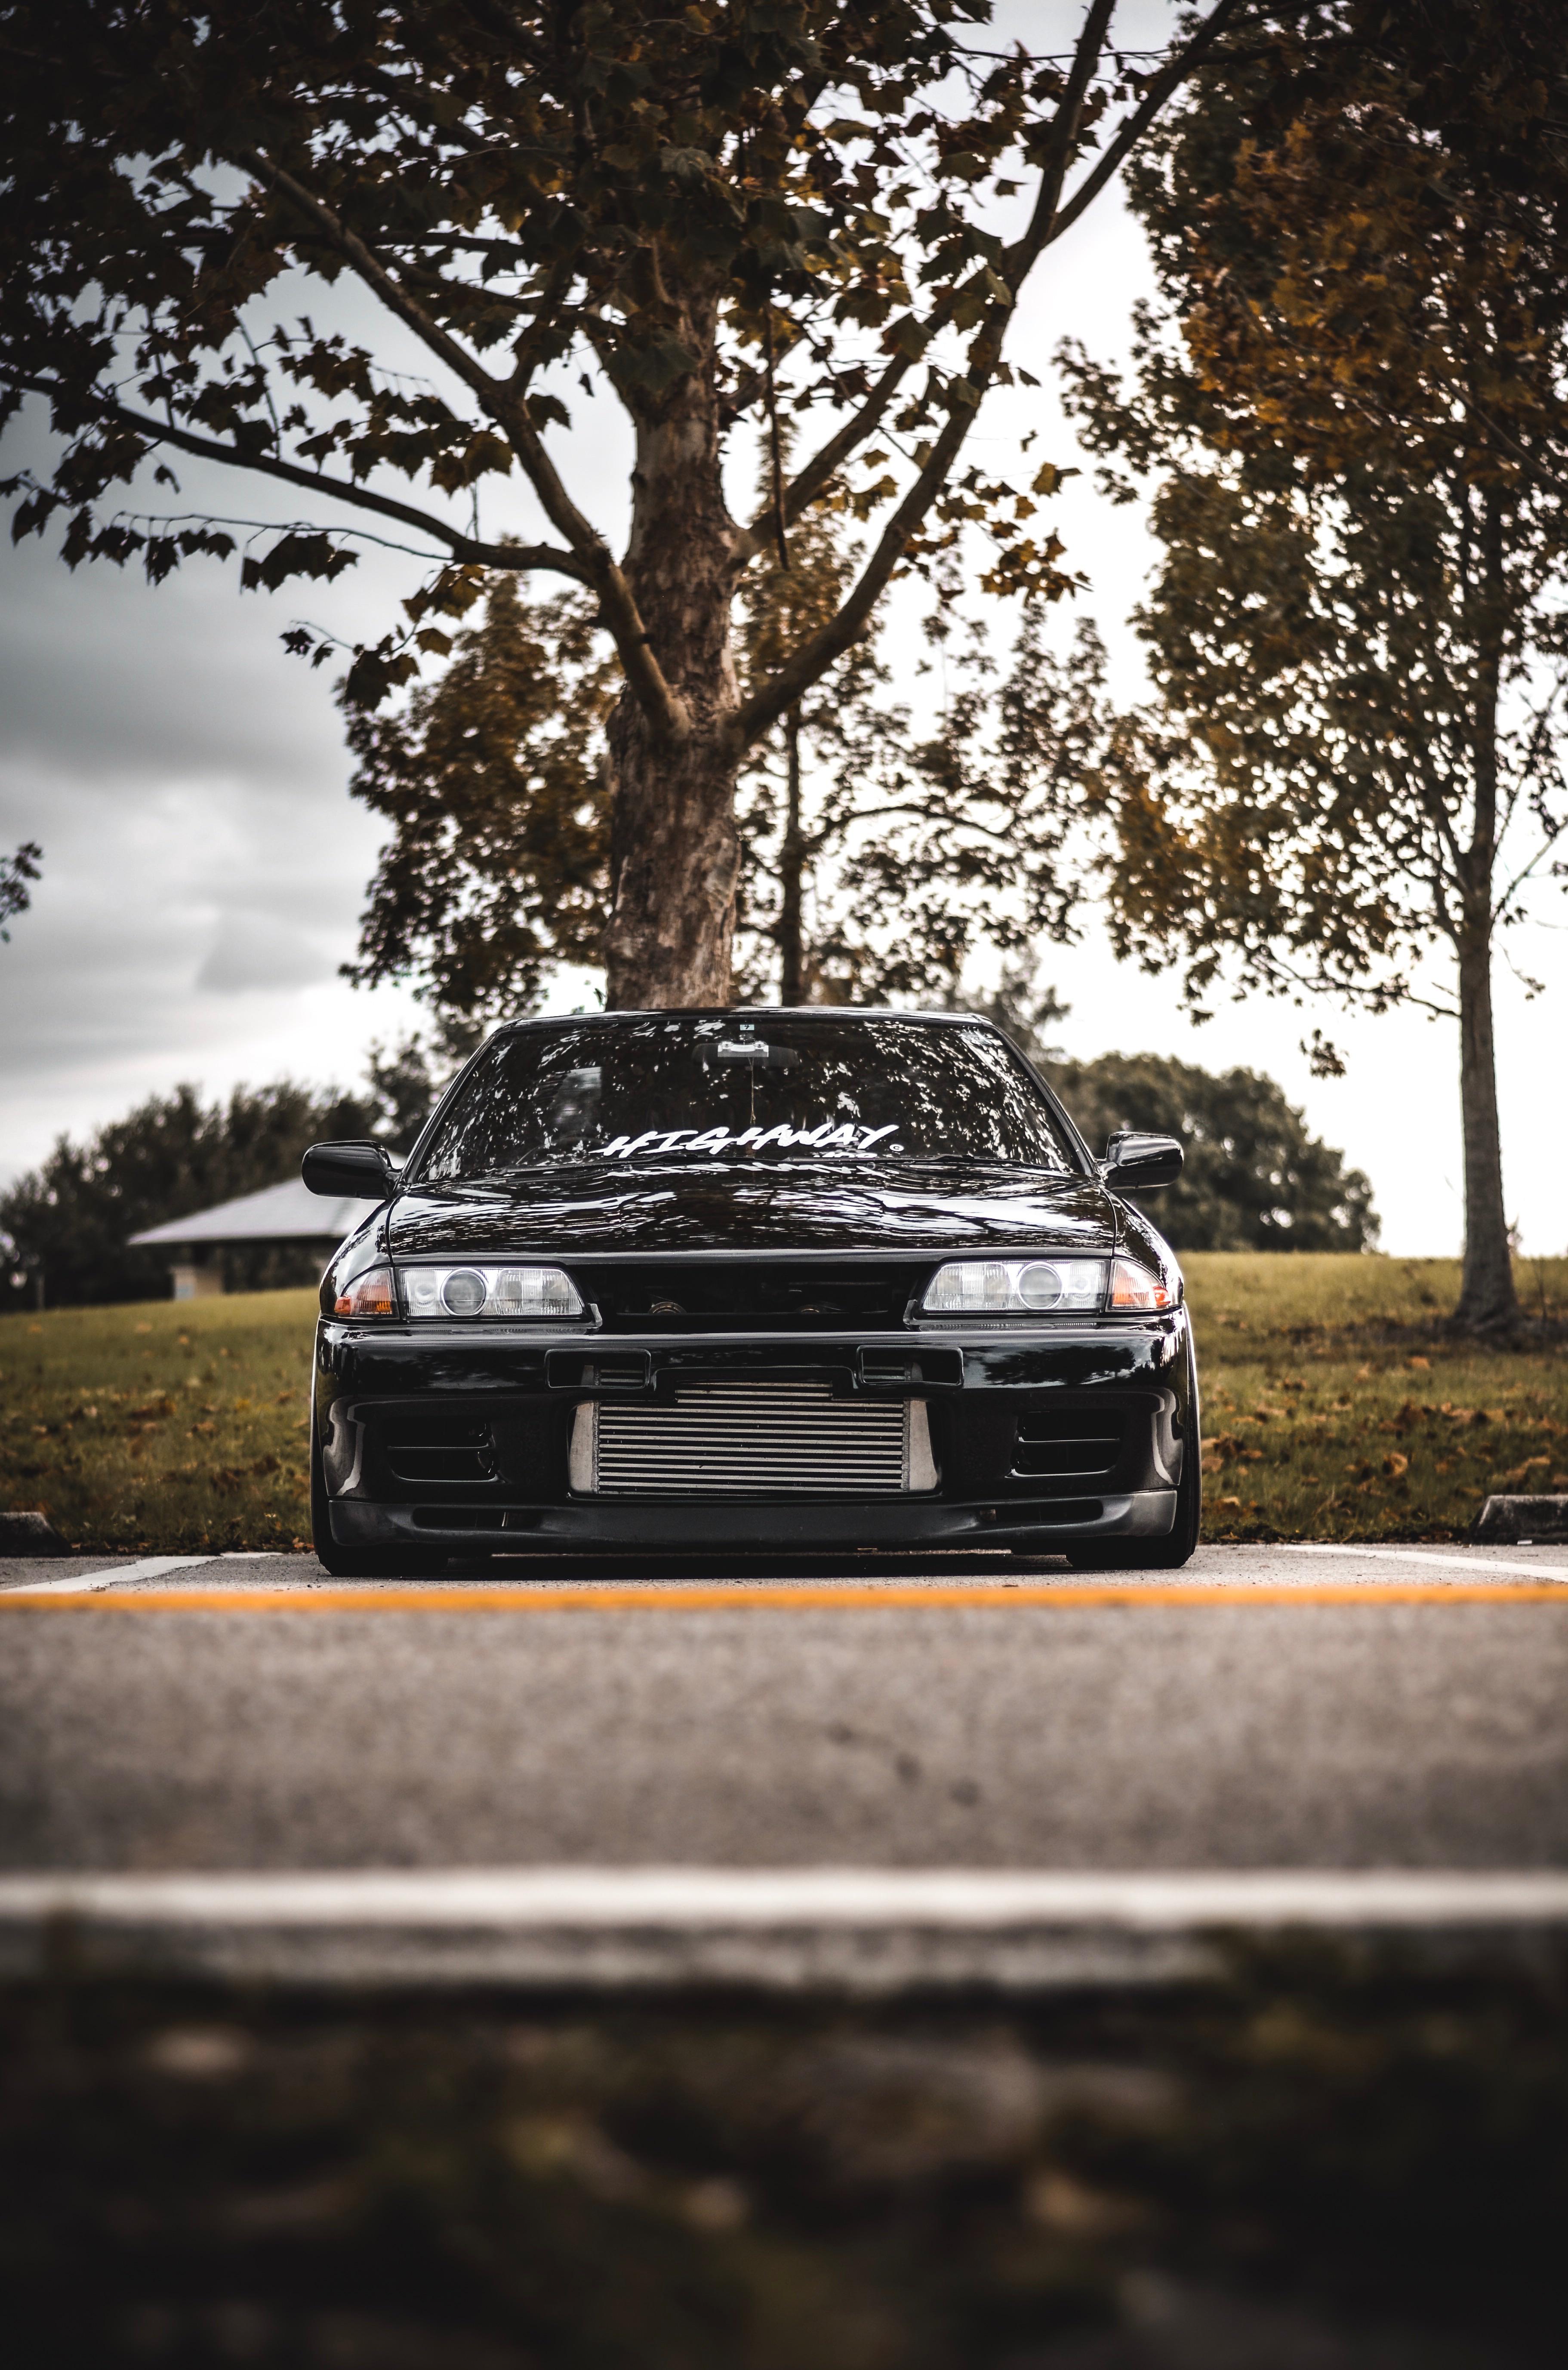 Fits Perfect As A Wallpaper Here S My R32 Stance